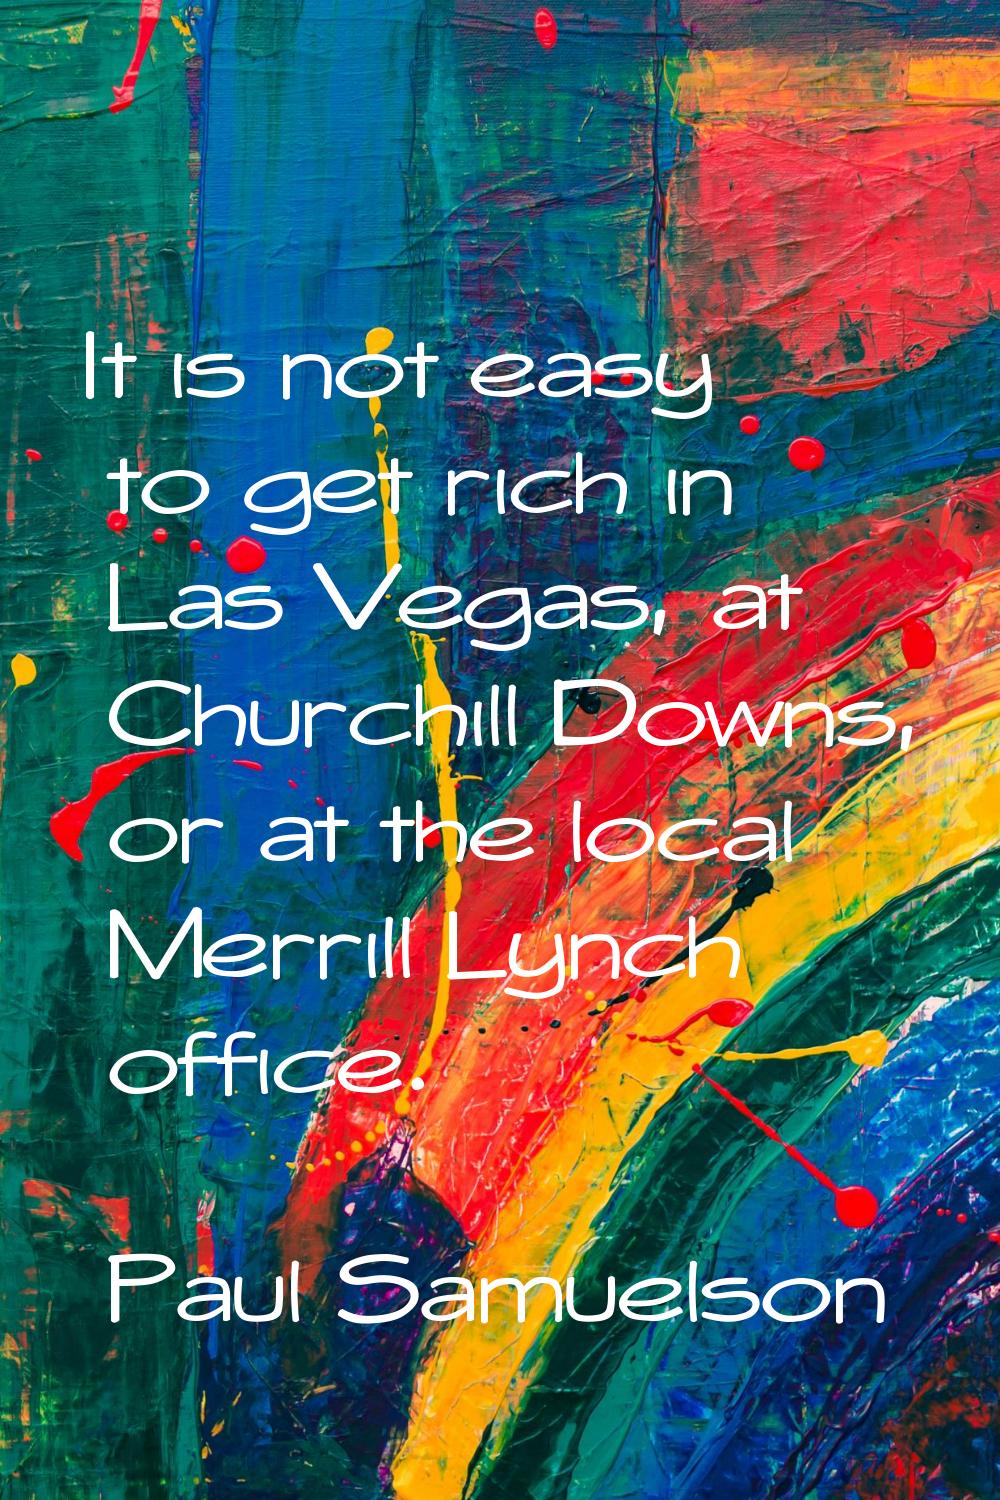 It is not easy to get rich in Las Vegas, at Churchill Downs, or at the local Merrill Lynch office.